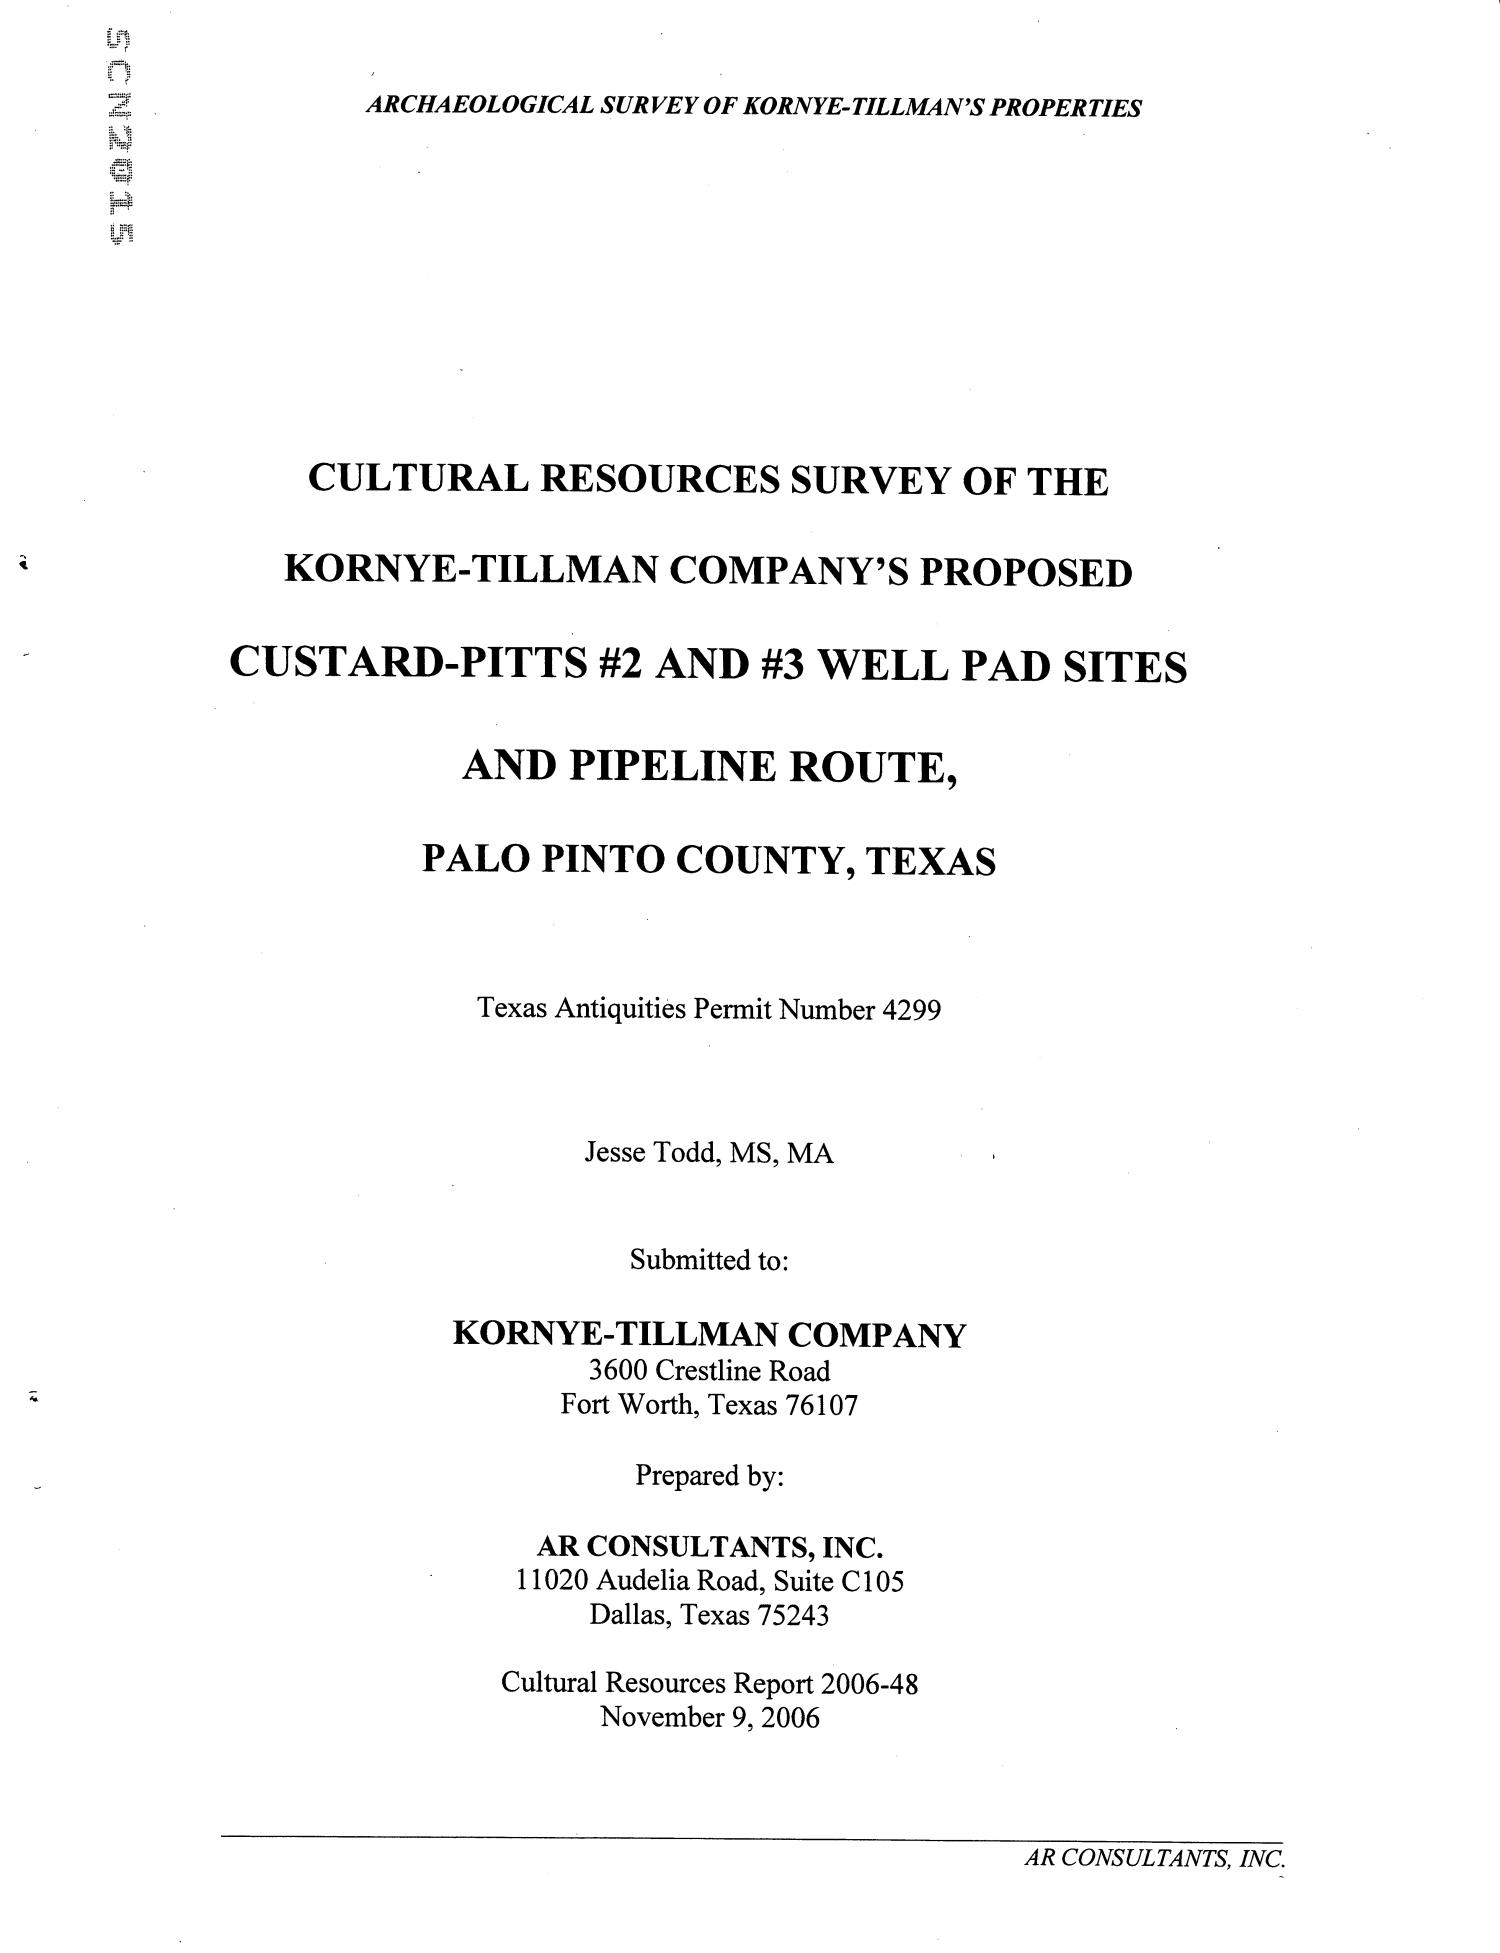 Cultural Resources Survey of the Kornye-Tillman Company's Proposed Custard-Pitts #2 and #3 Well Pad Sites and Pipeline Route, Palo Pinto County, Texas
                                                
                                                    Title Page
                                                